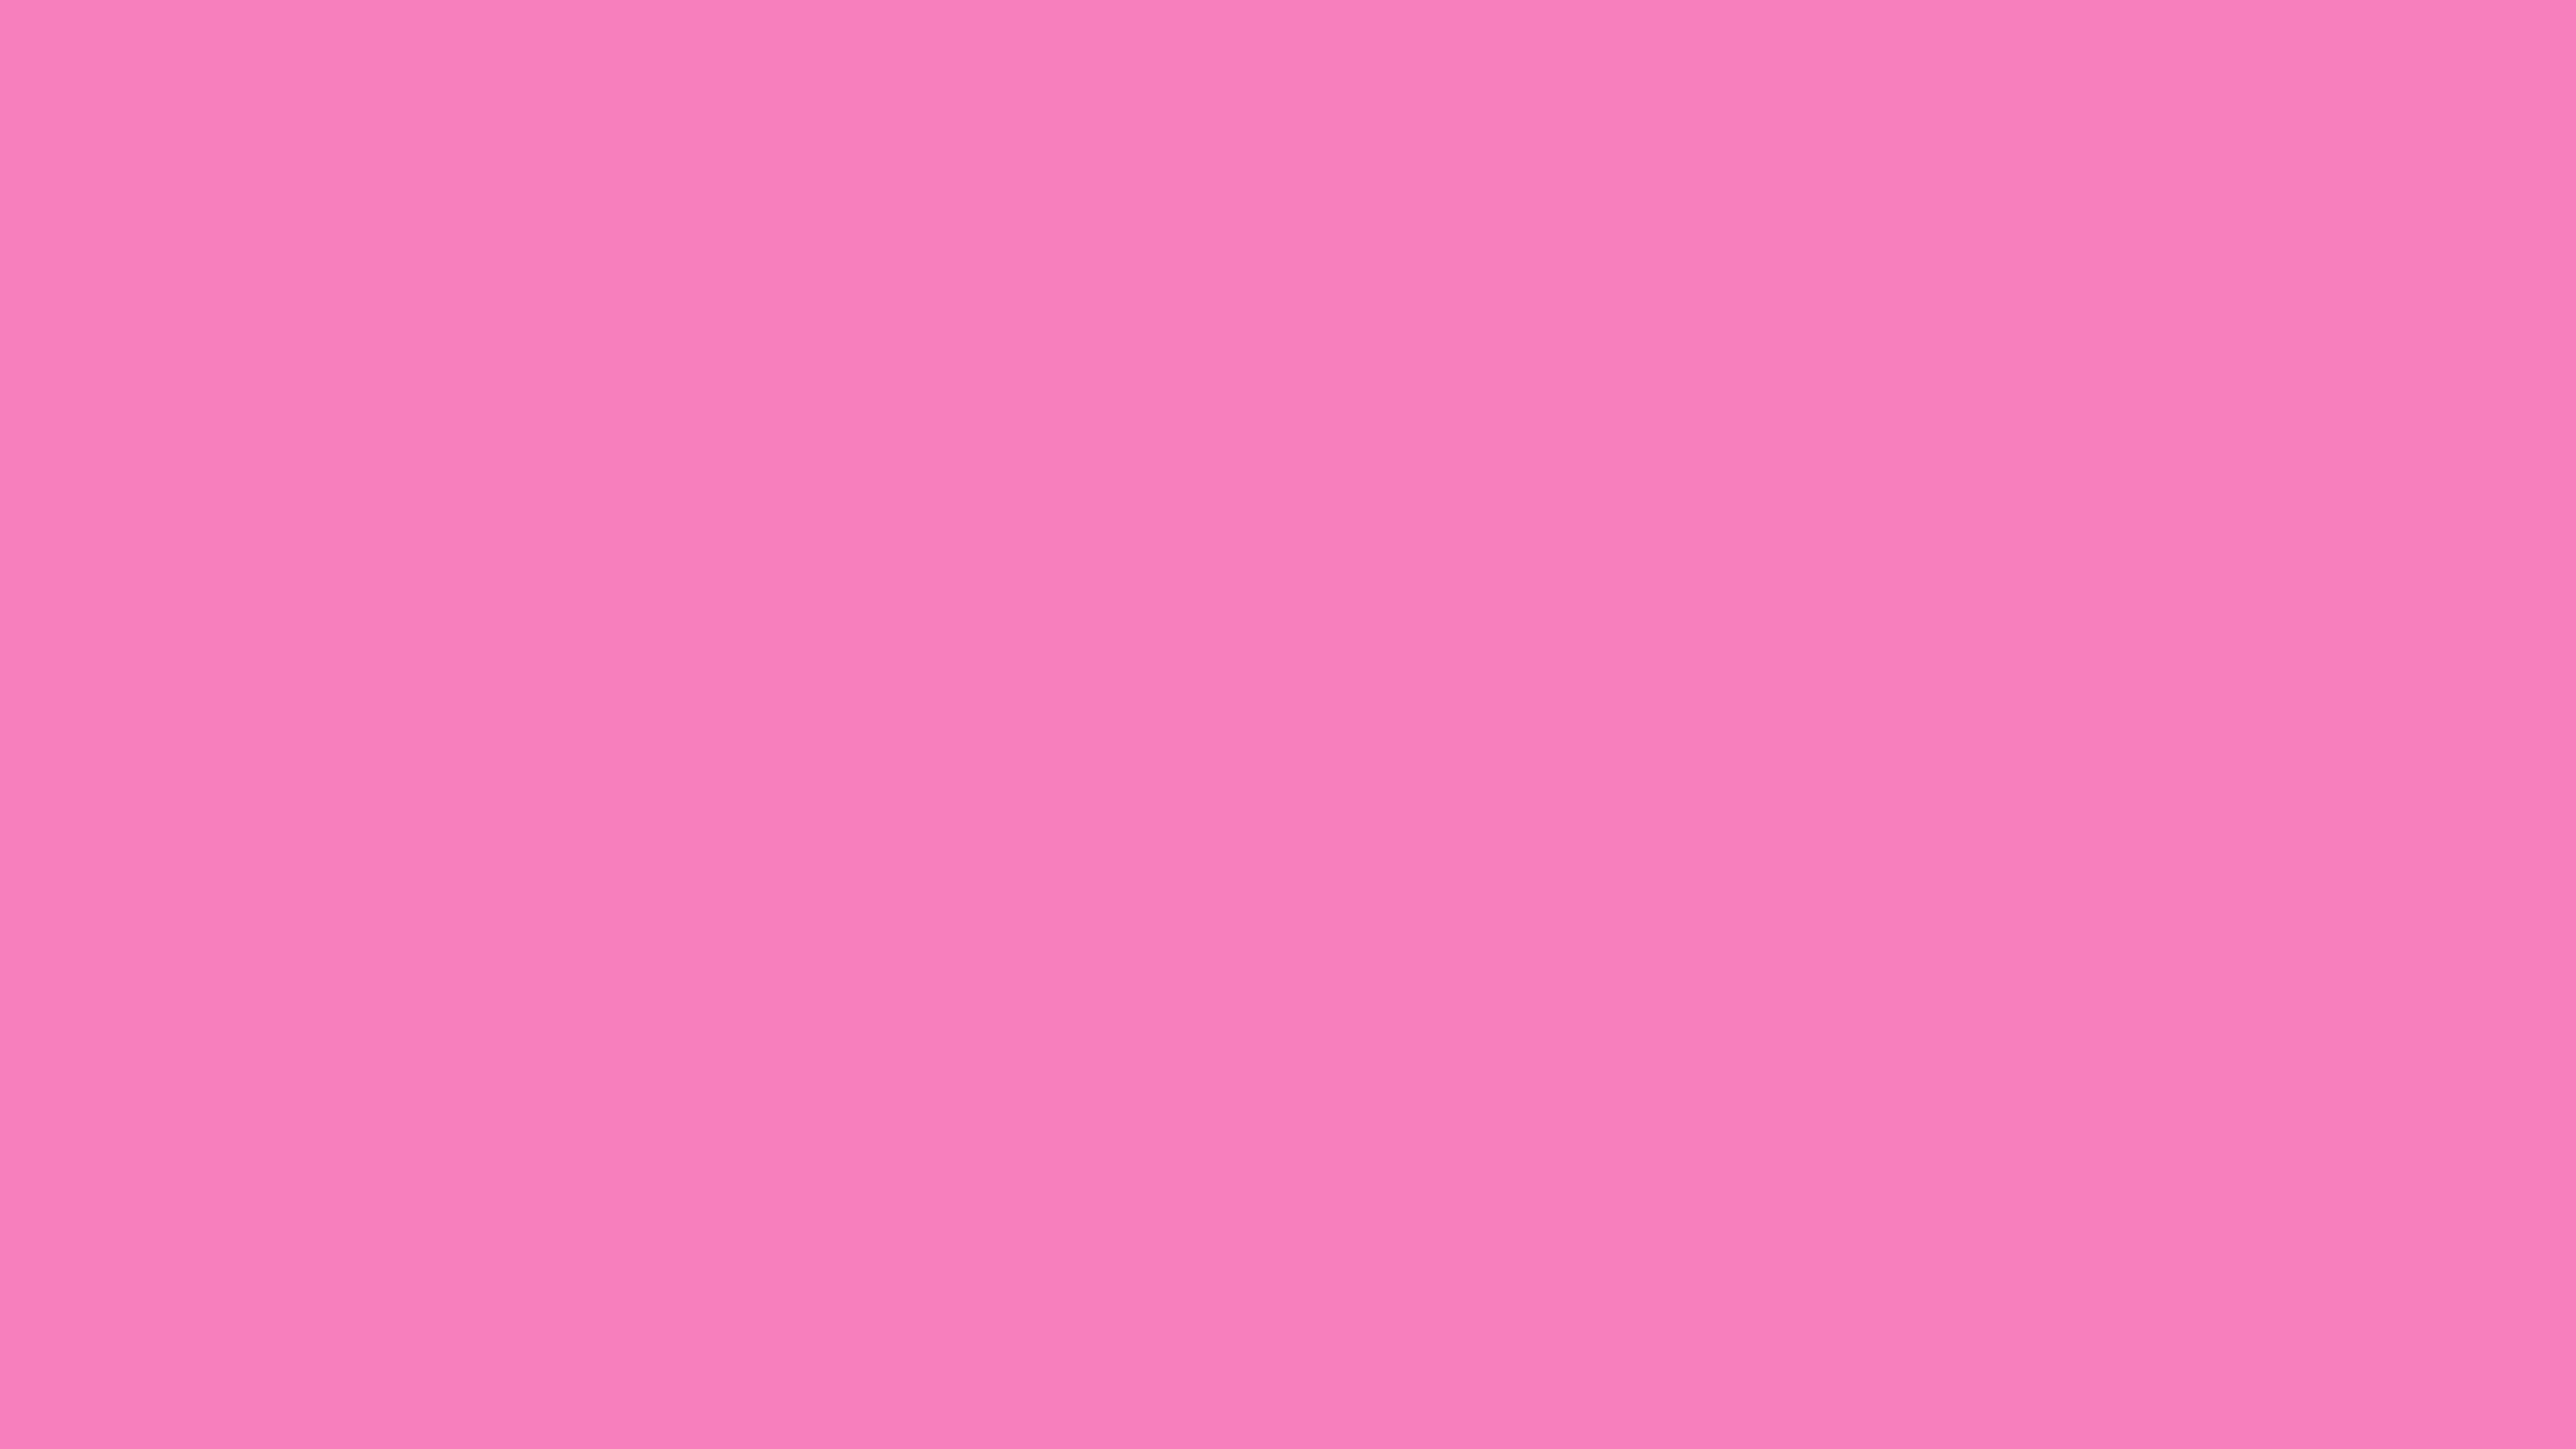 7680x4320 Persian Pink Solid Color Background